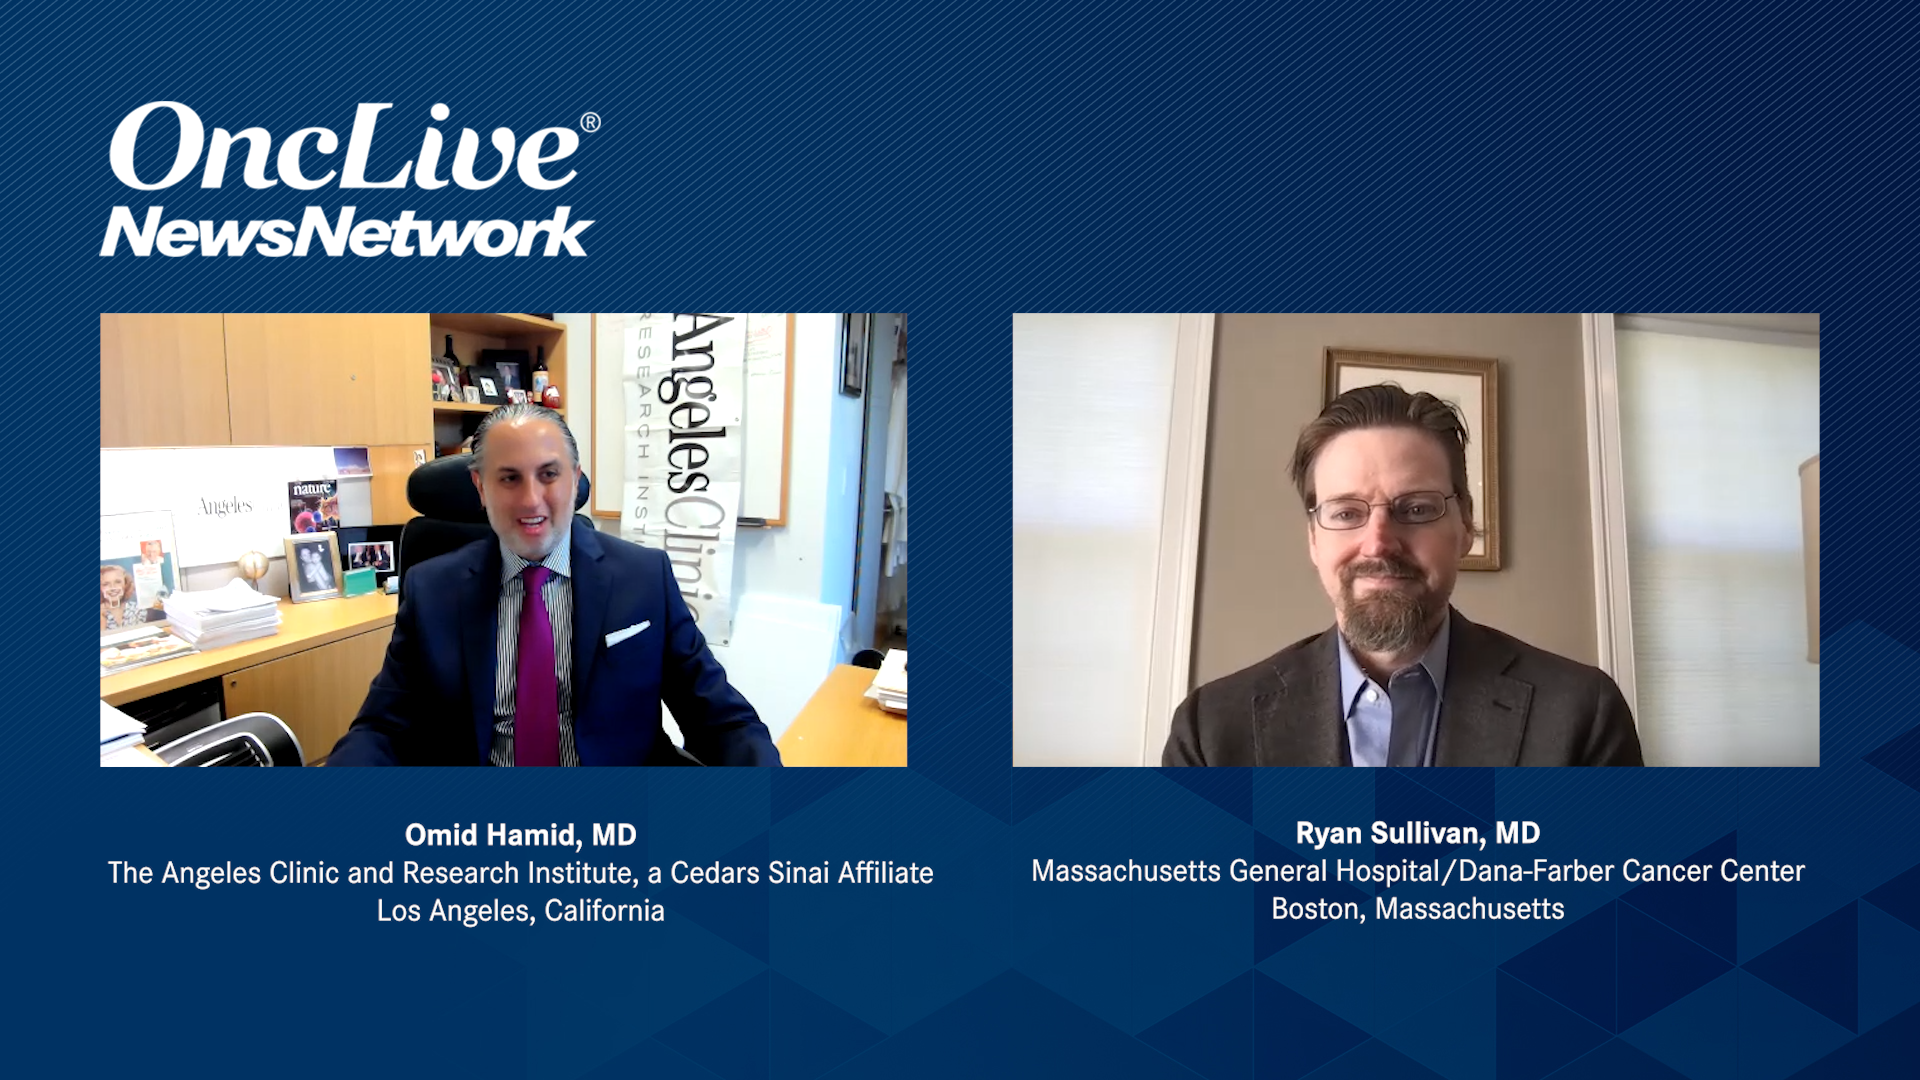 Omid Hamid, MD, and Ryan Sullivan, MD, in an OncLive News Network discussion